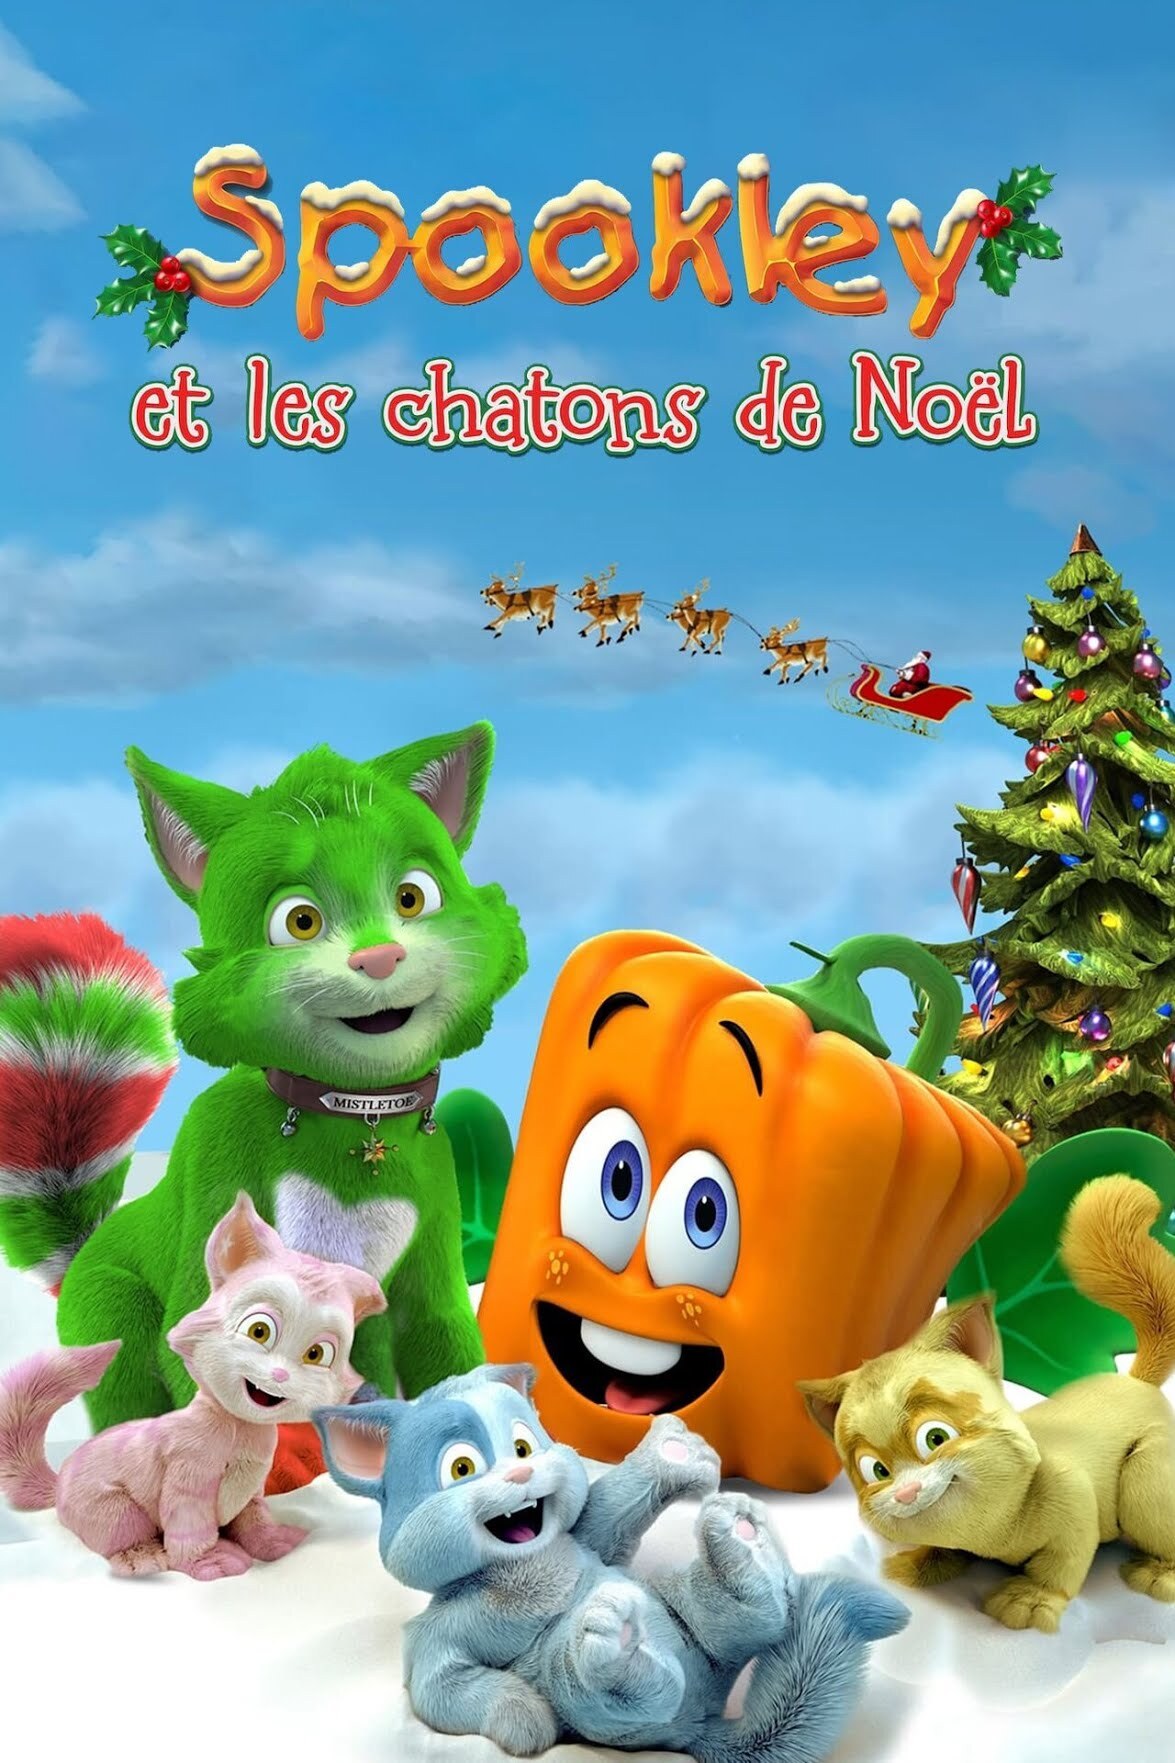 Spookley et les chatons de Noël (Spookley and the Christmas Kittens) 2020* R139